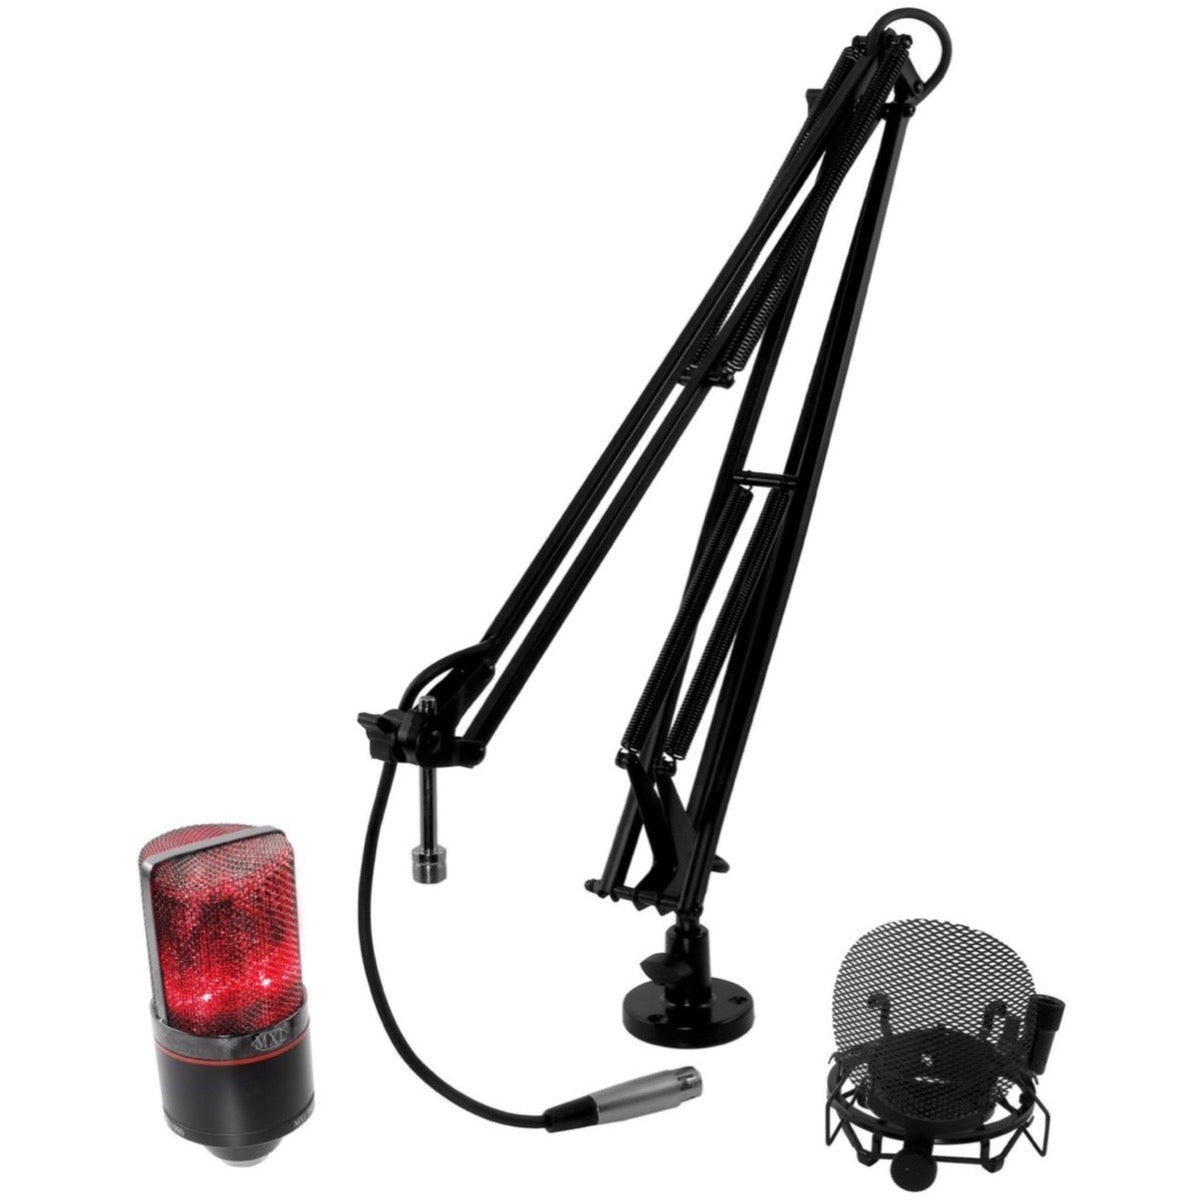 MXL OverStream Bundle with 990 Microphone, Blizzard